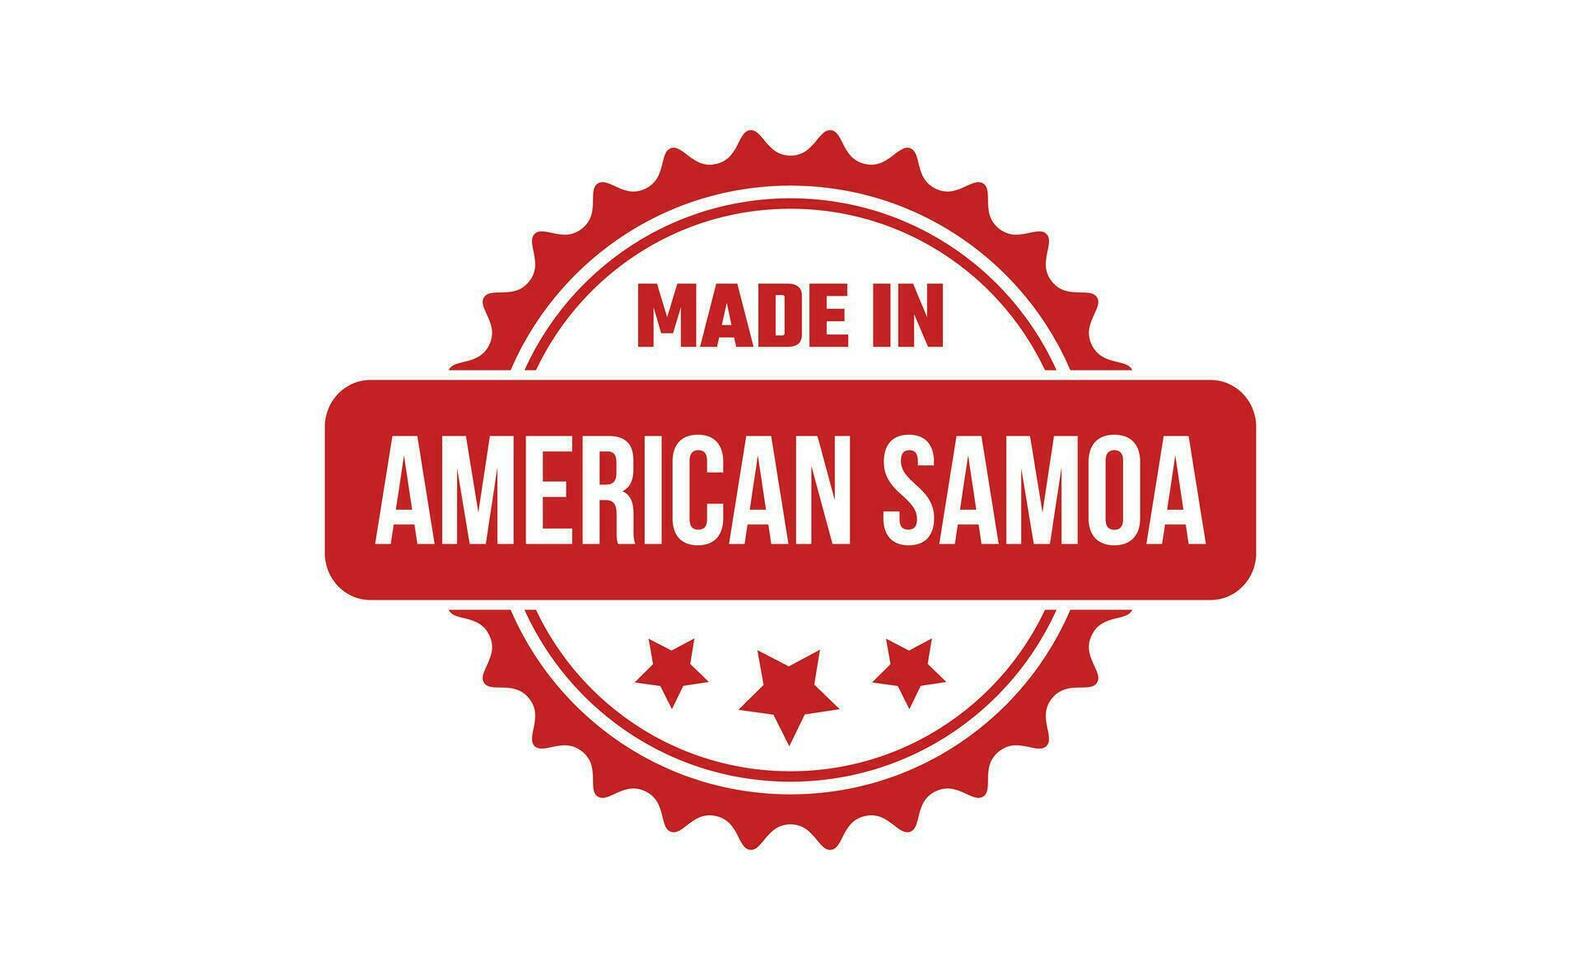 Made In American Samoa Rubber Stamp vector